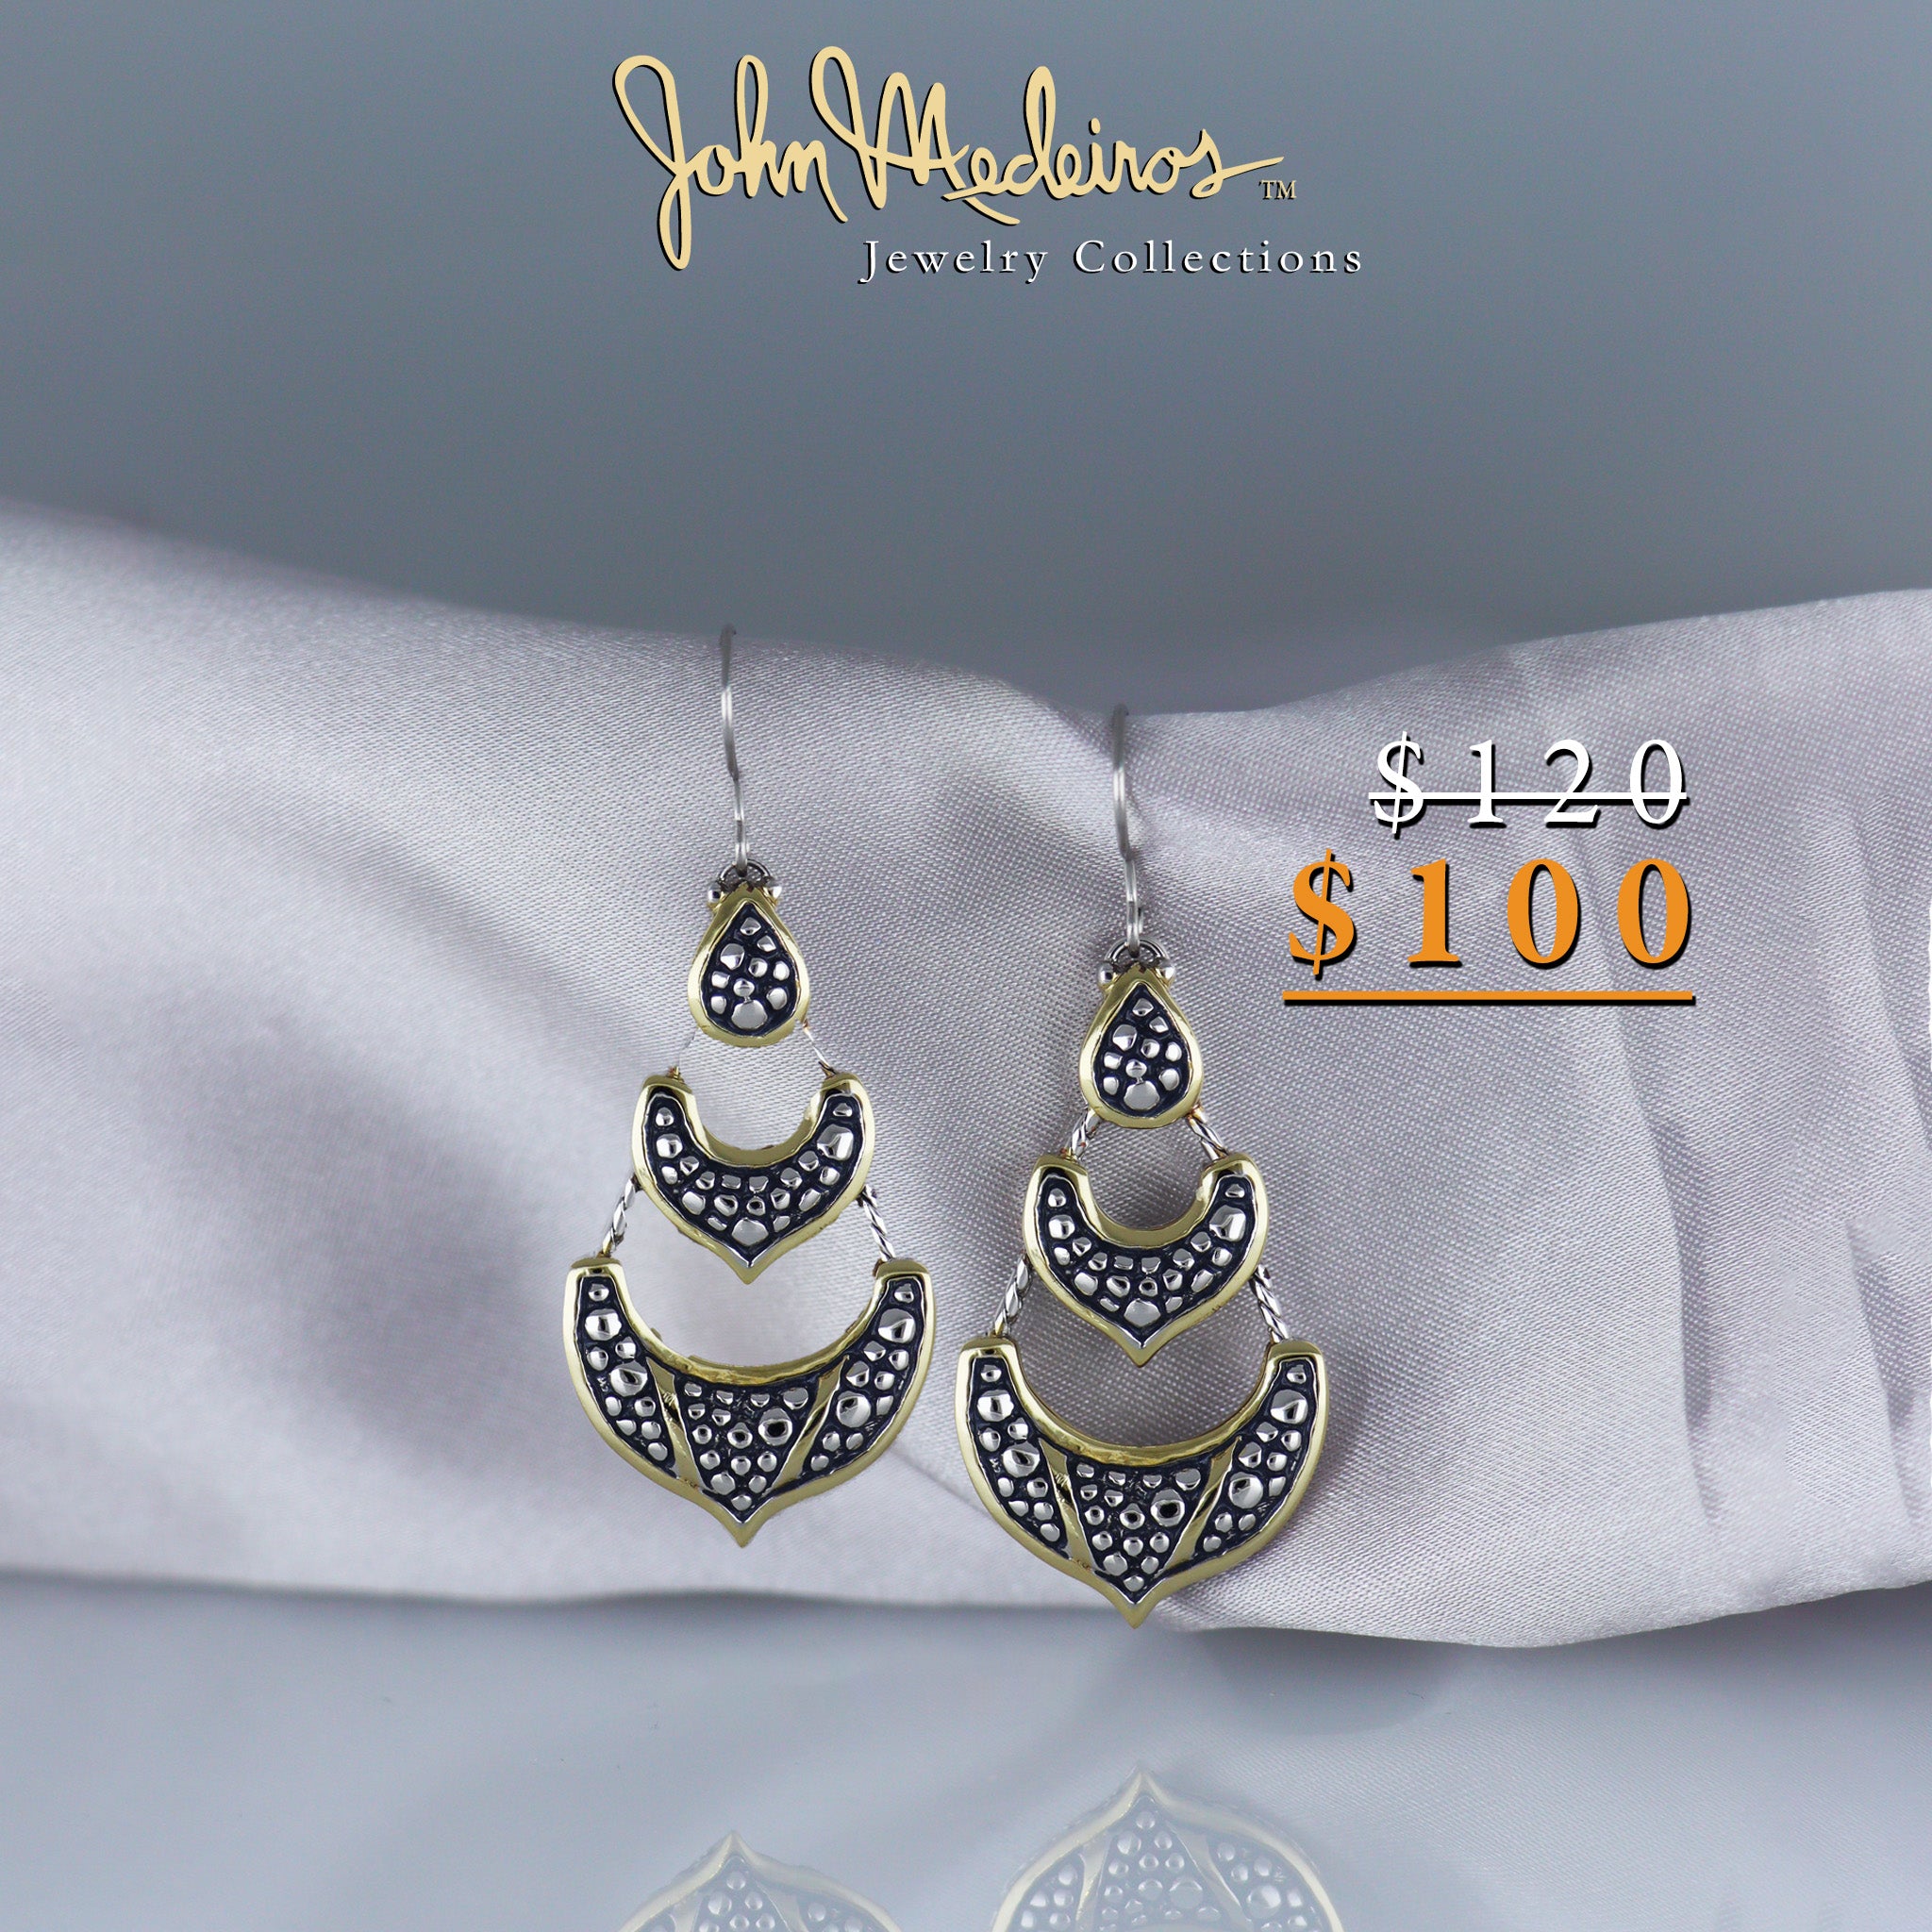 Under $100 – John Medeiros Jewelry Collections